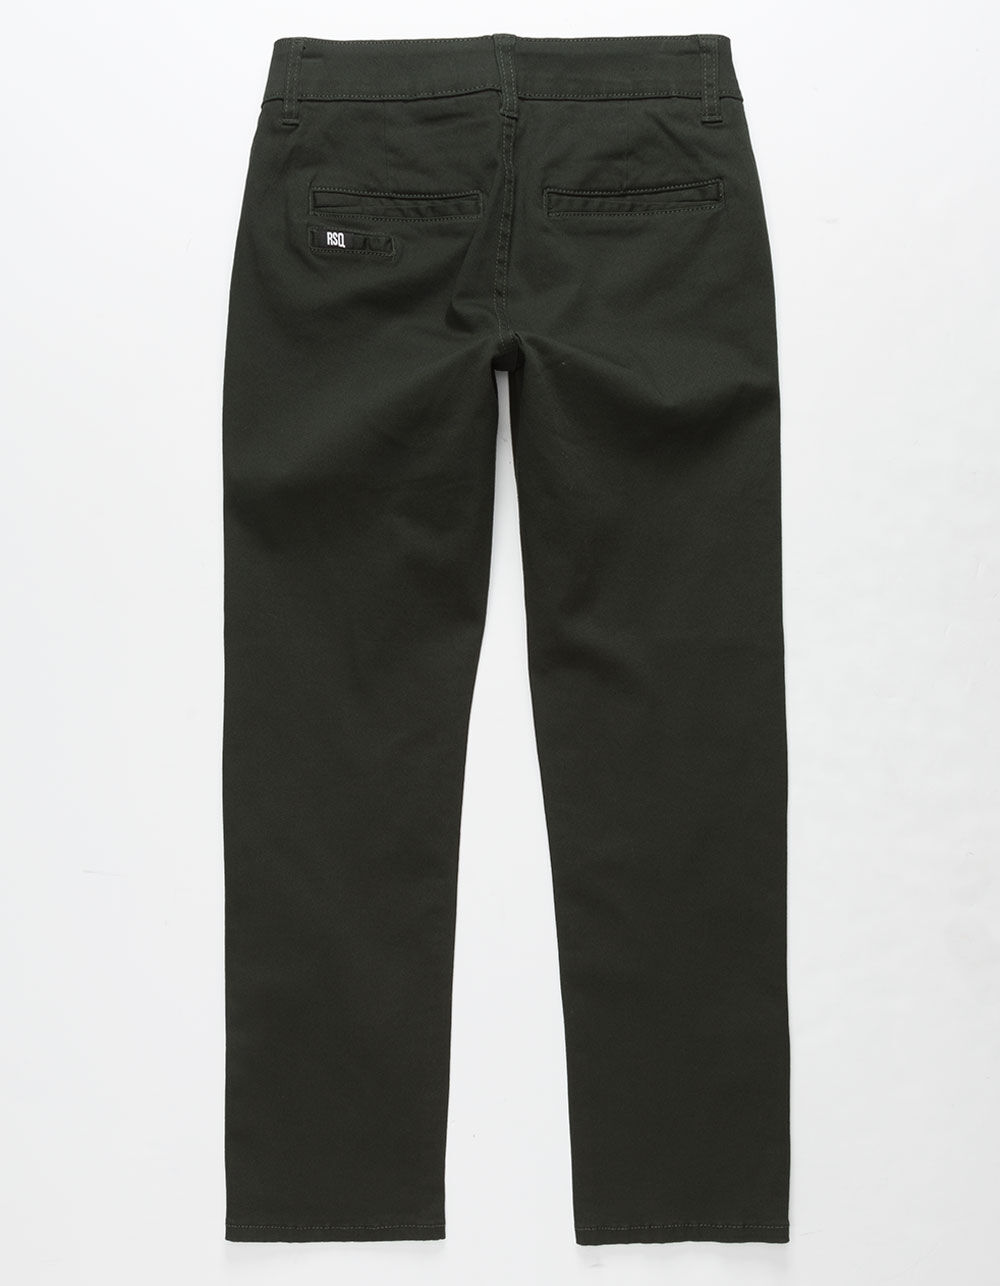 RSQ London Dark Olive Boys Skinny Chino Pants image number 4